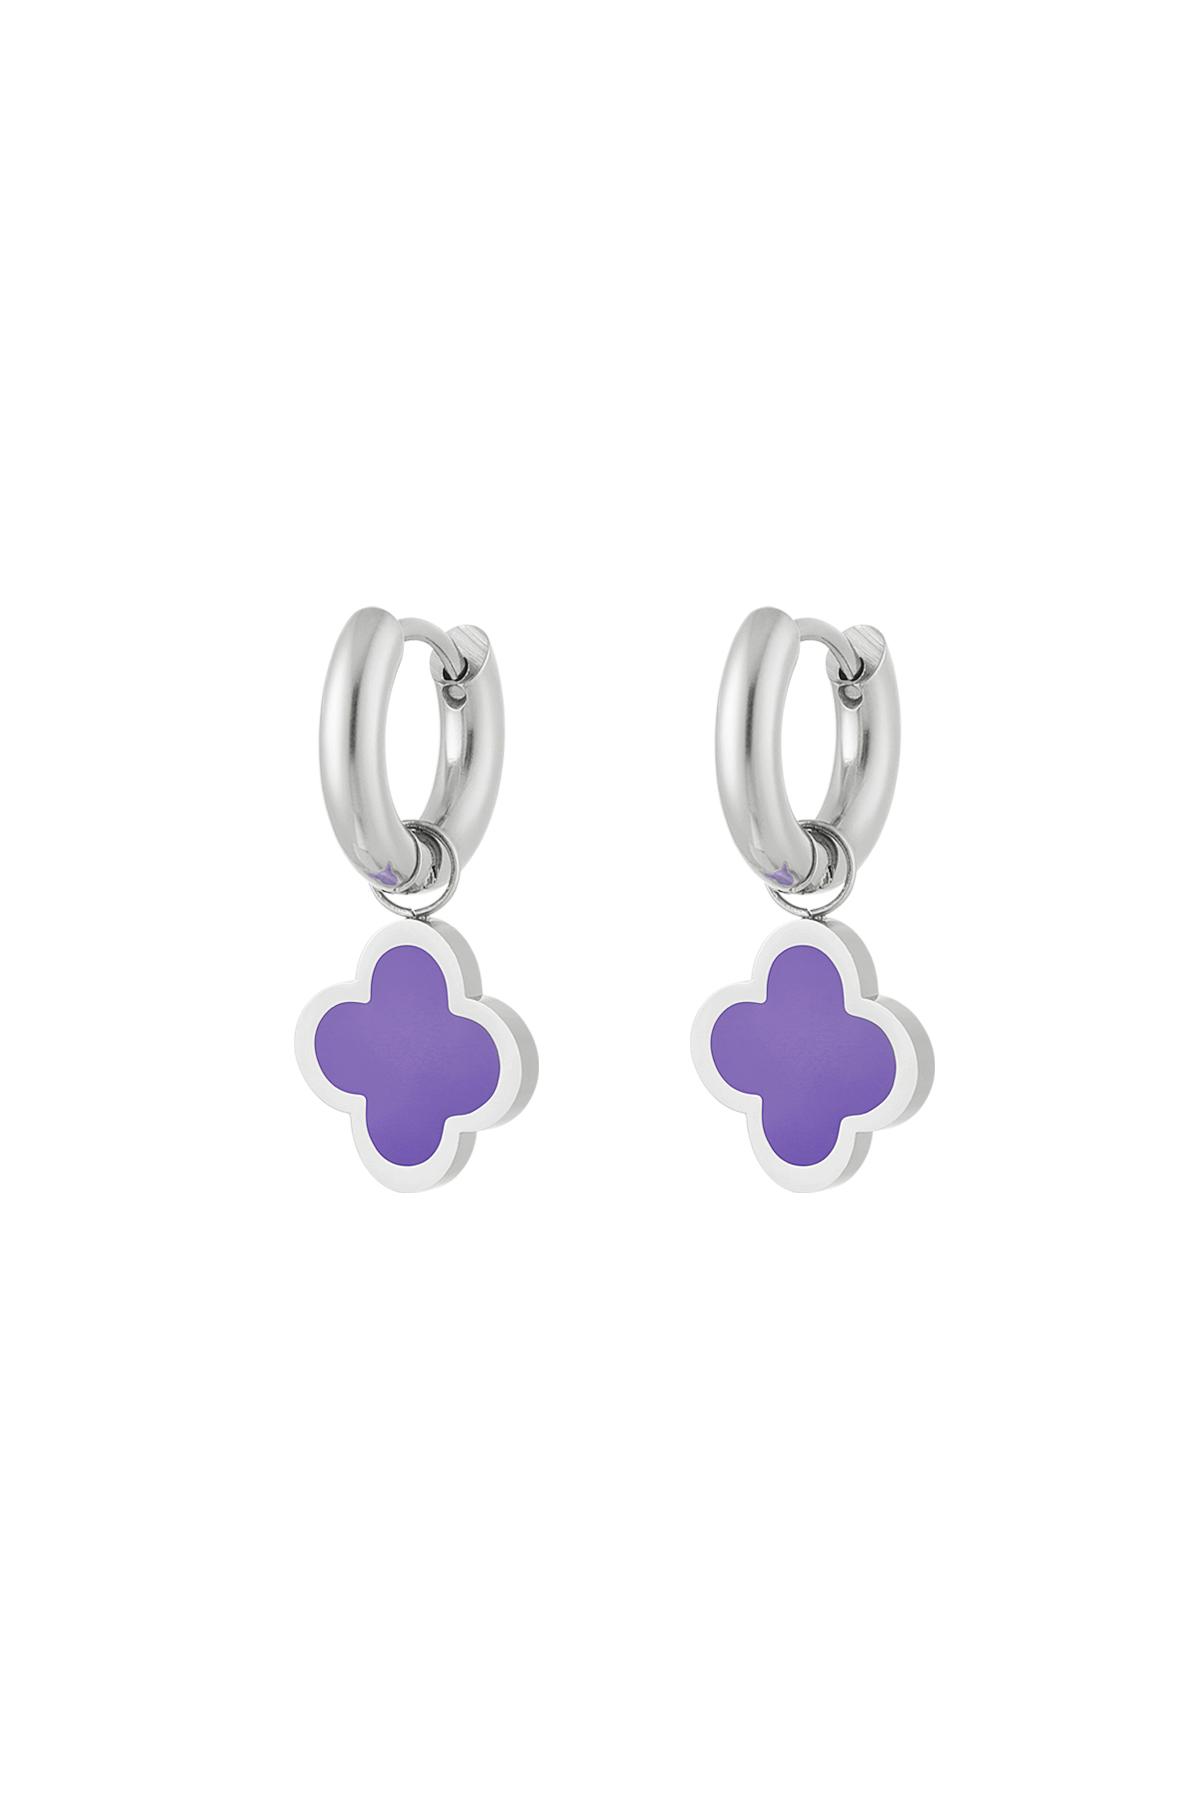 Earrings clover simple colorful Lilac Stainless Steel